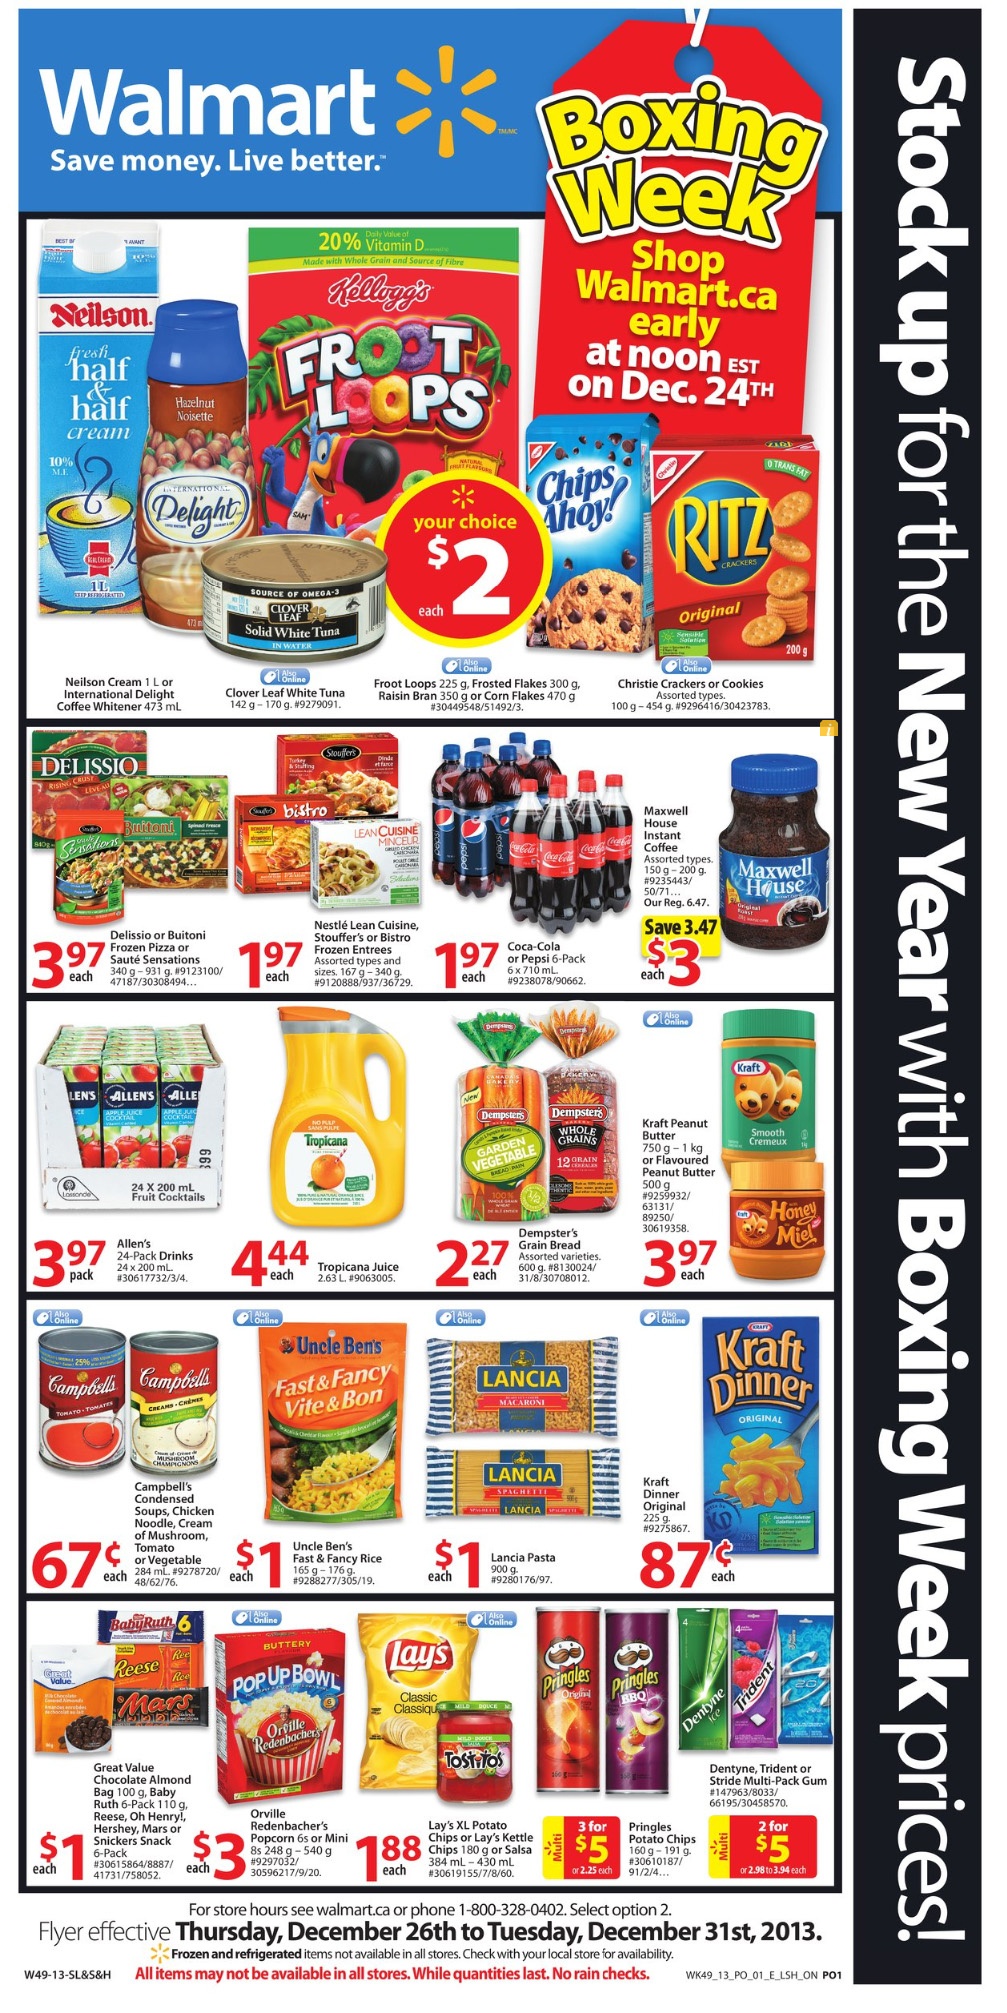 Online Coupons For Walmart Groceries - Coupon Trivia Crack - Free Printable Food Coupons For Walmart